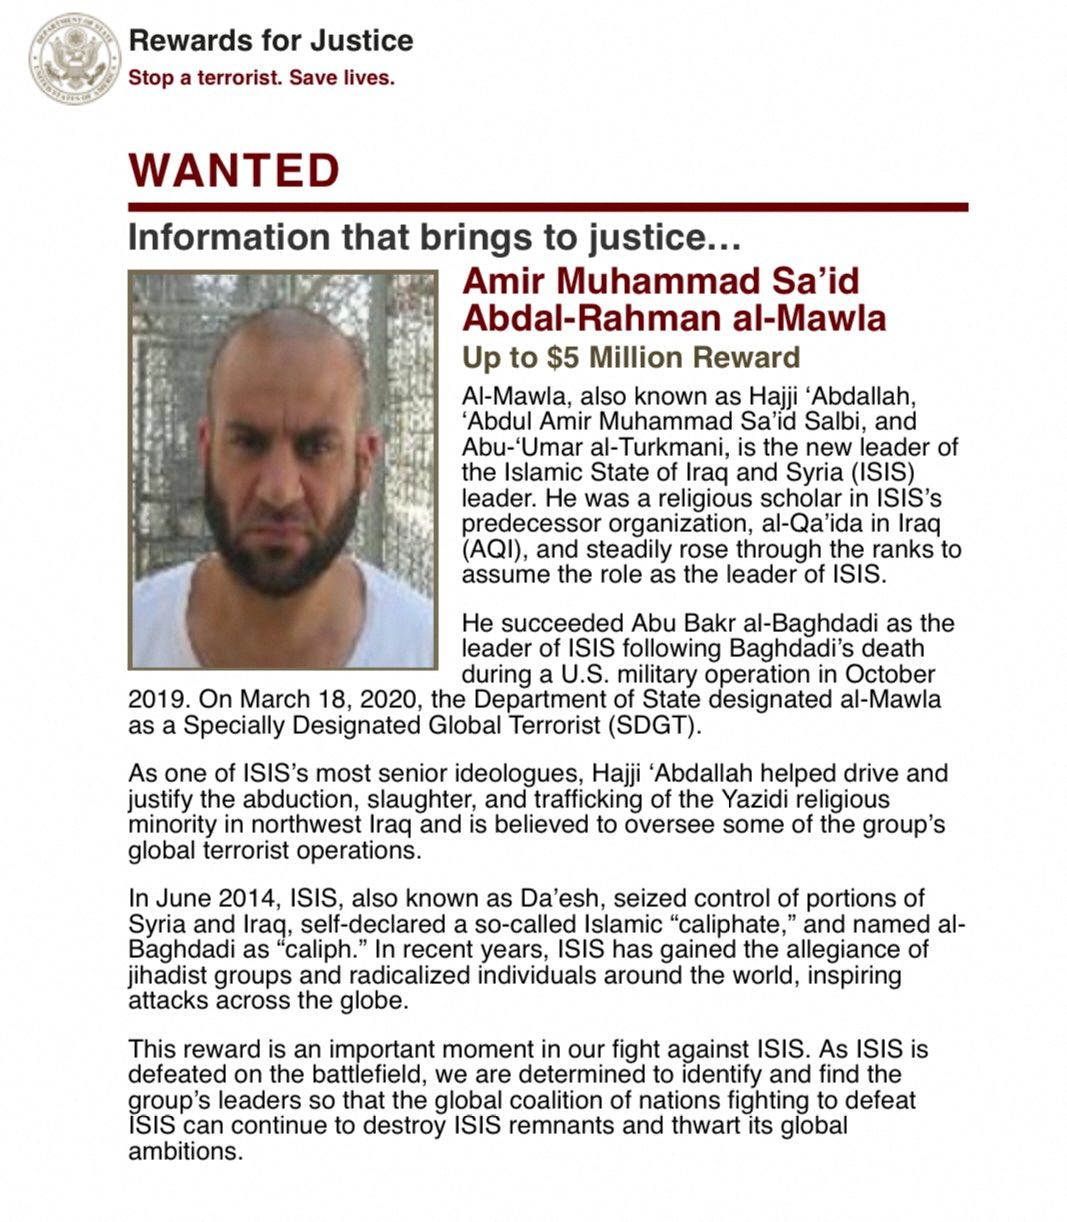 A 'wanted' notice for the Islamic State jihadist group leader Abu Ibrahim al-Quraishi is seen in this image obtained by Reuters from social media